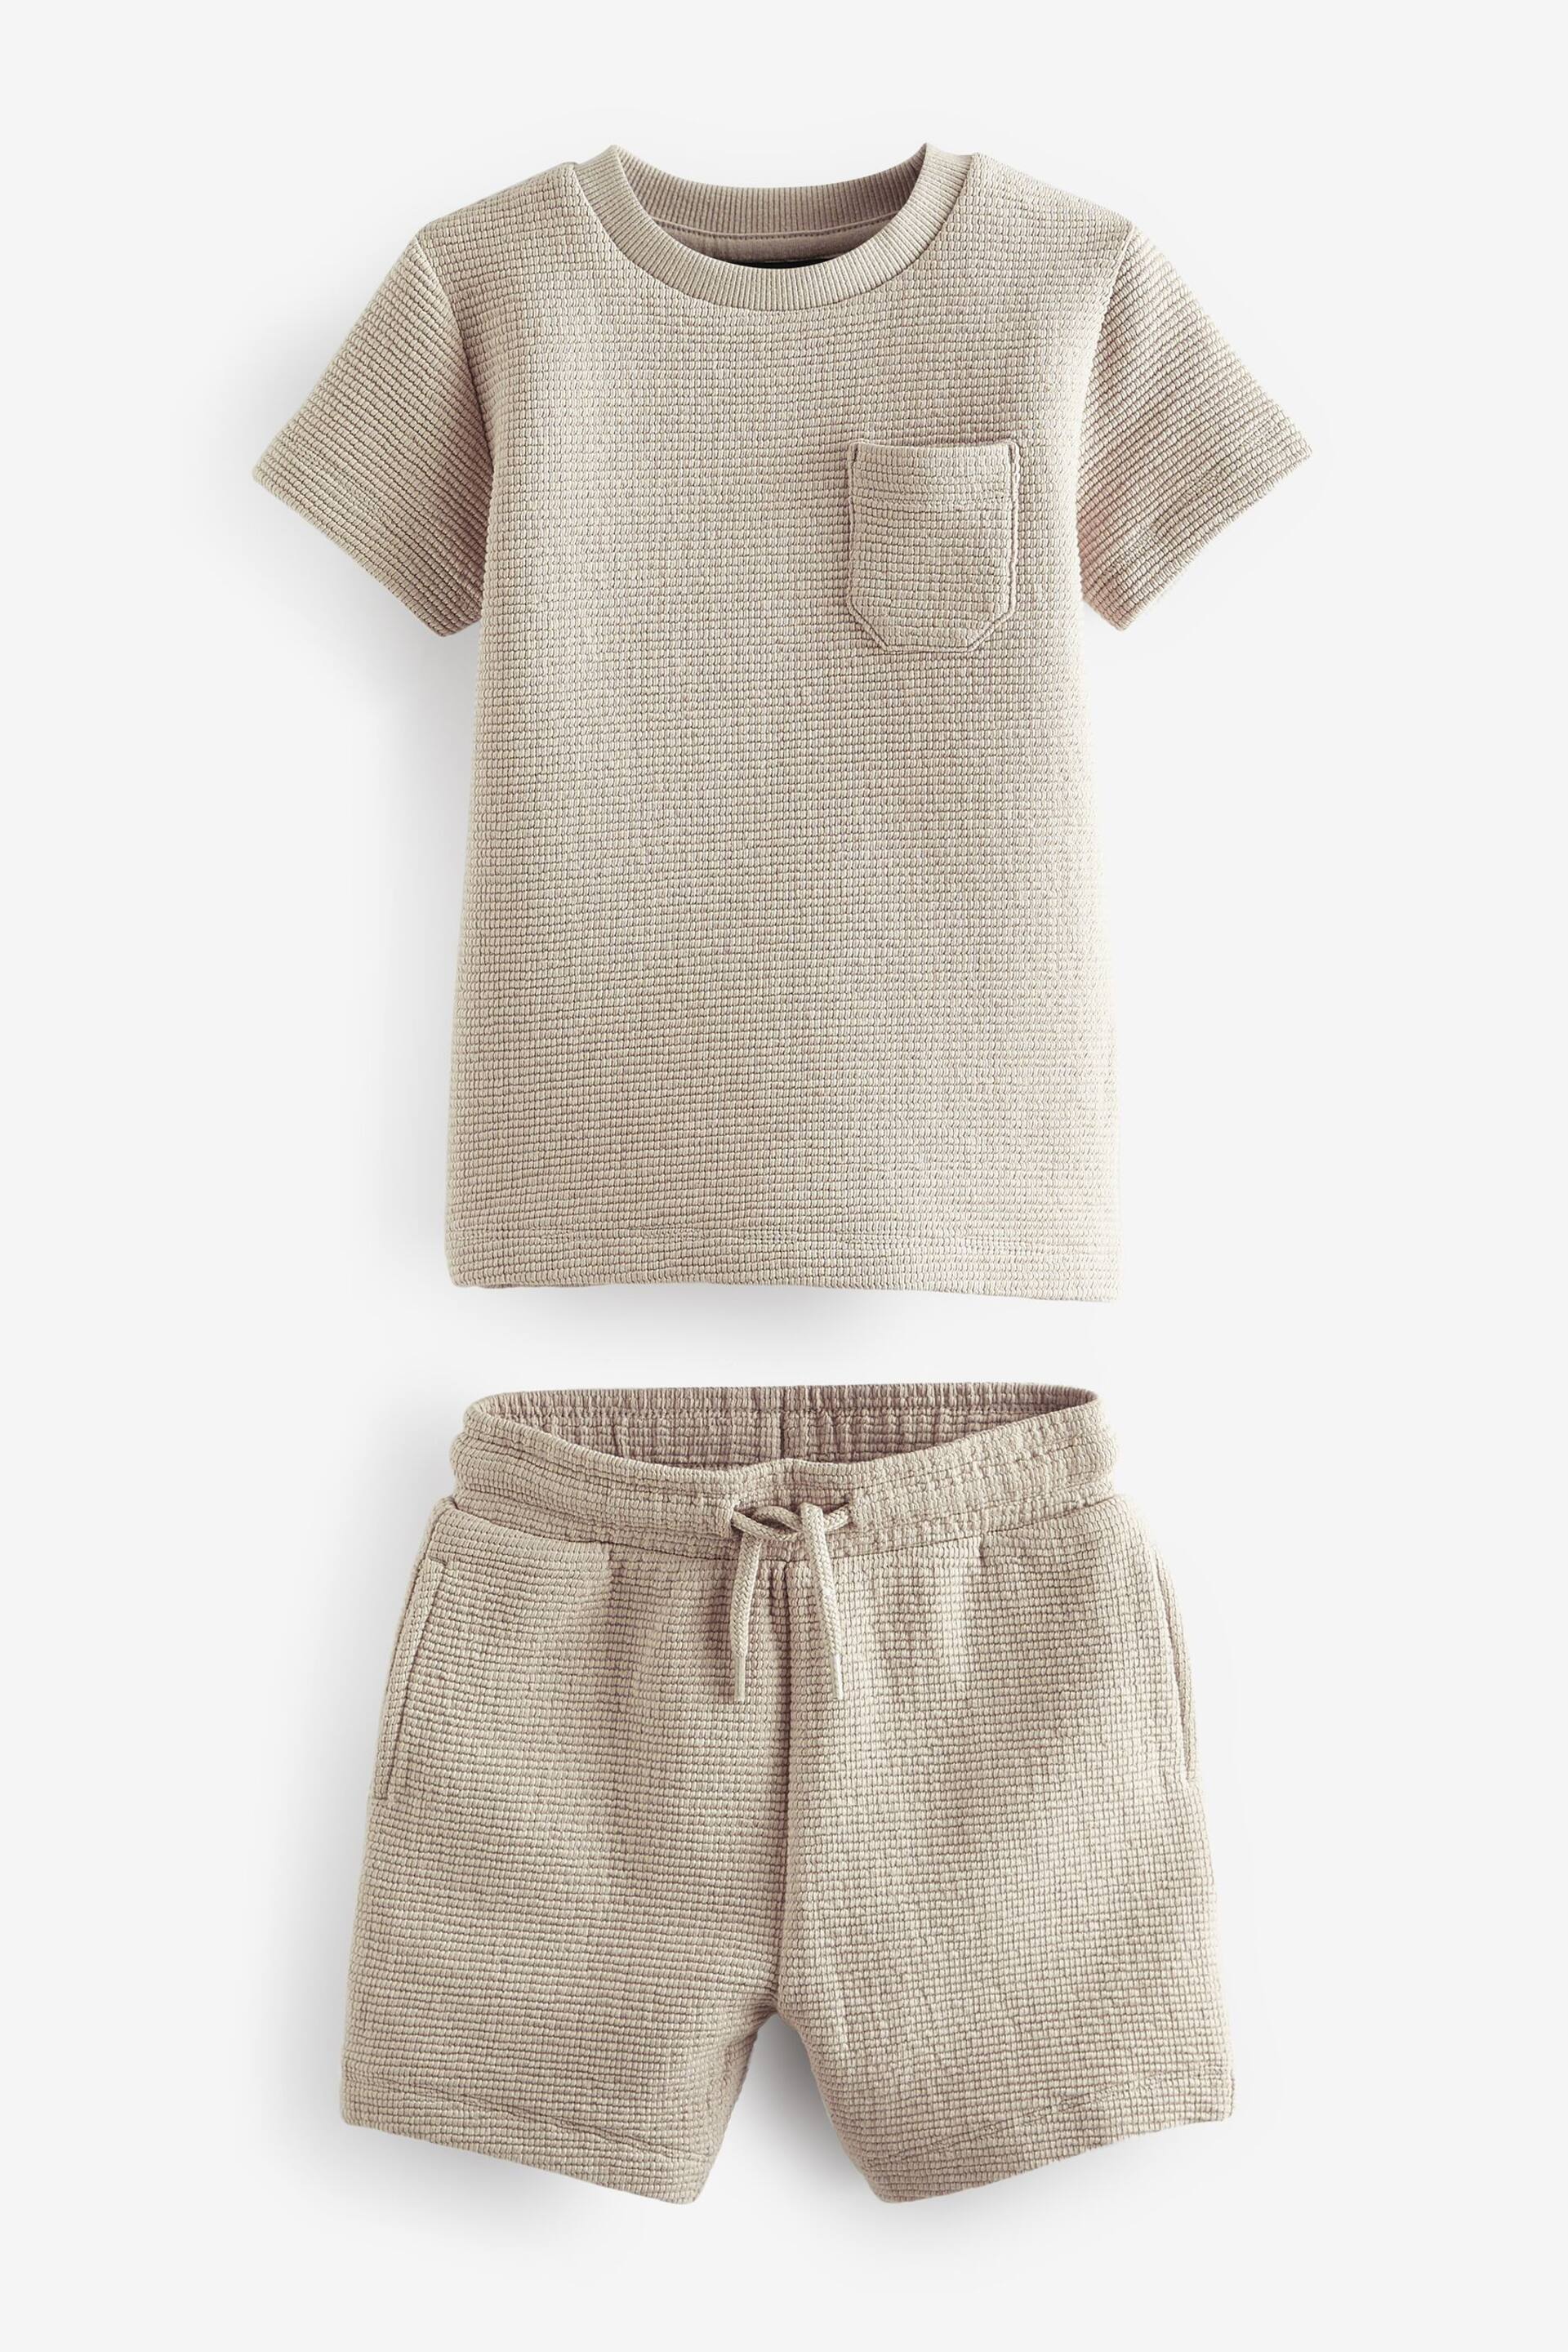 Neutral Textured Jersey Pocket T-Shirt and Shorts Set (3mths-7yrs) - Image 6 of 8